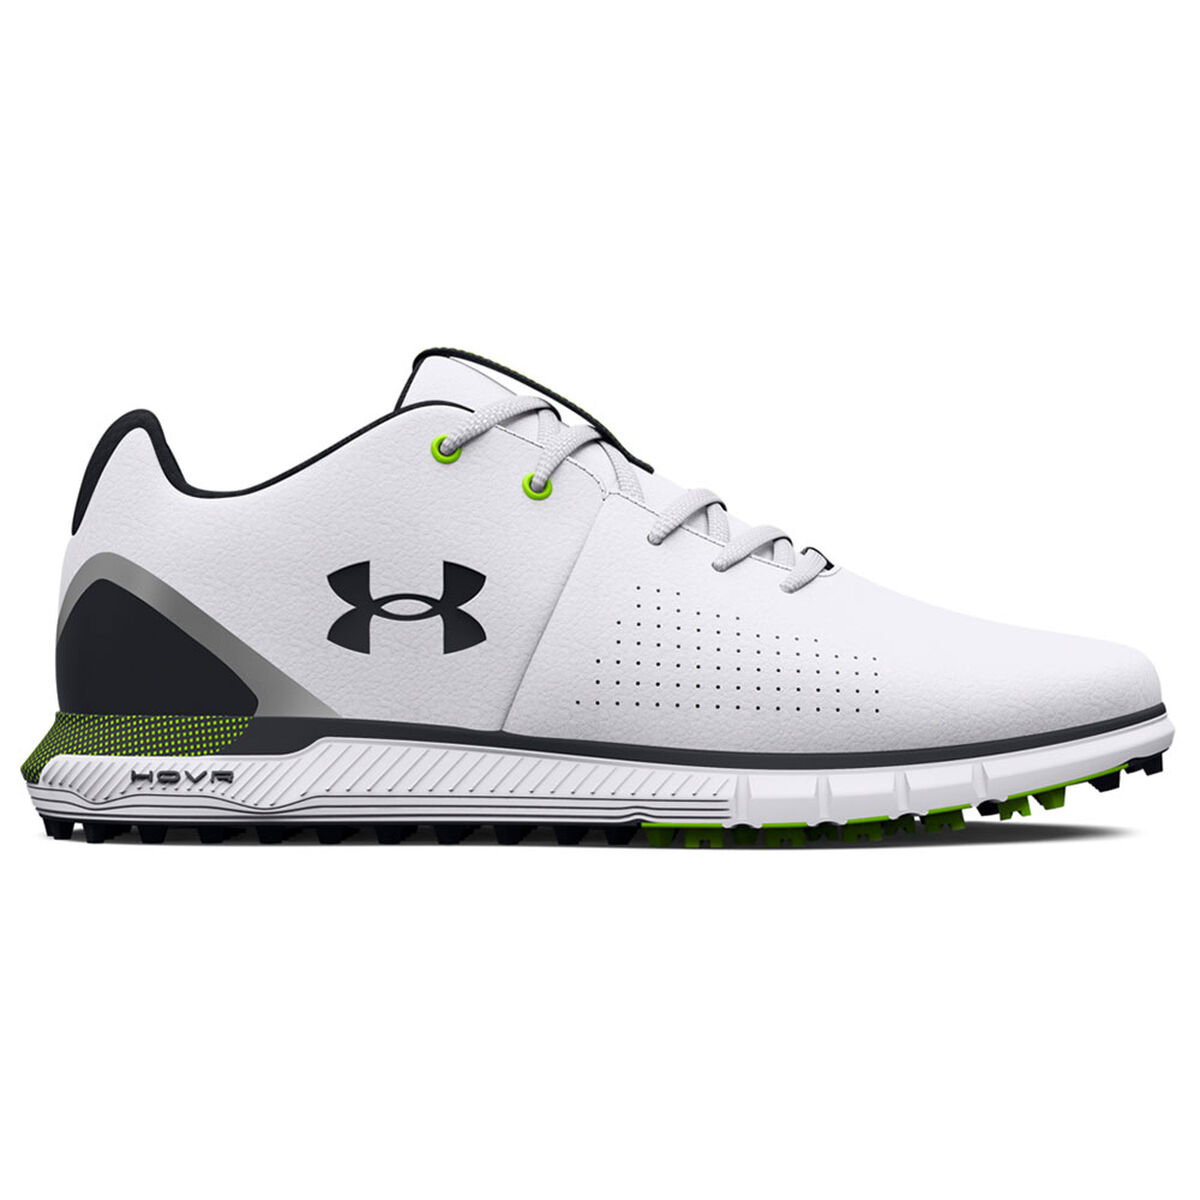 Under Armour Men’s HOVR Fade 2 Spikeless Golf Shoes, Mens, White/black/black, 7 | American Golf